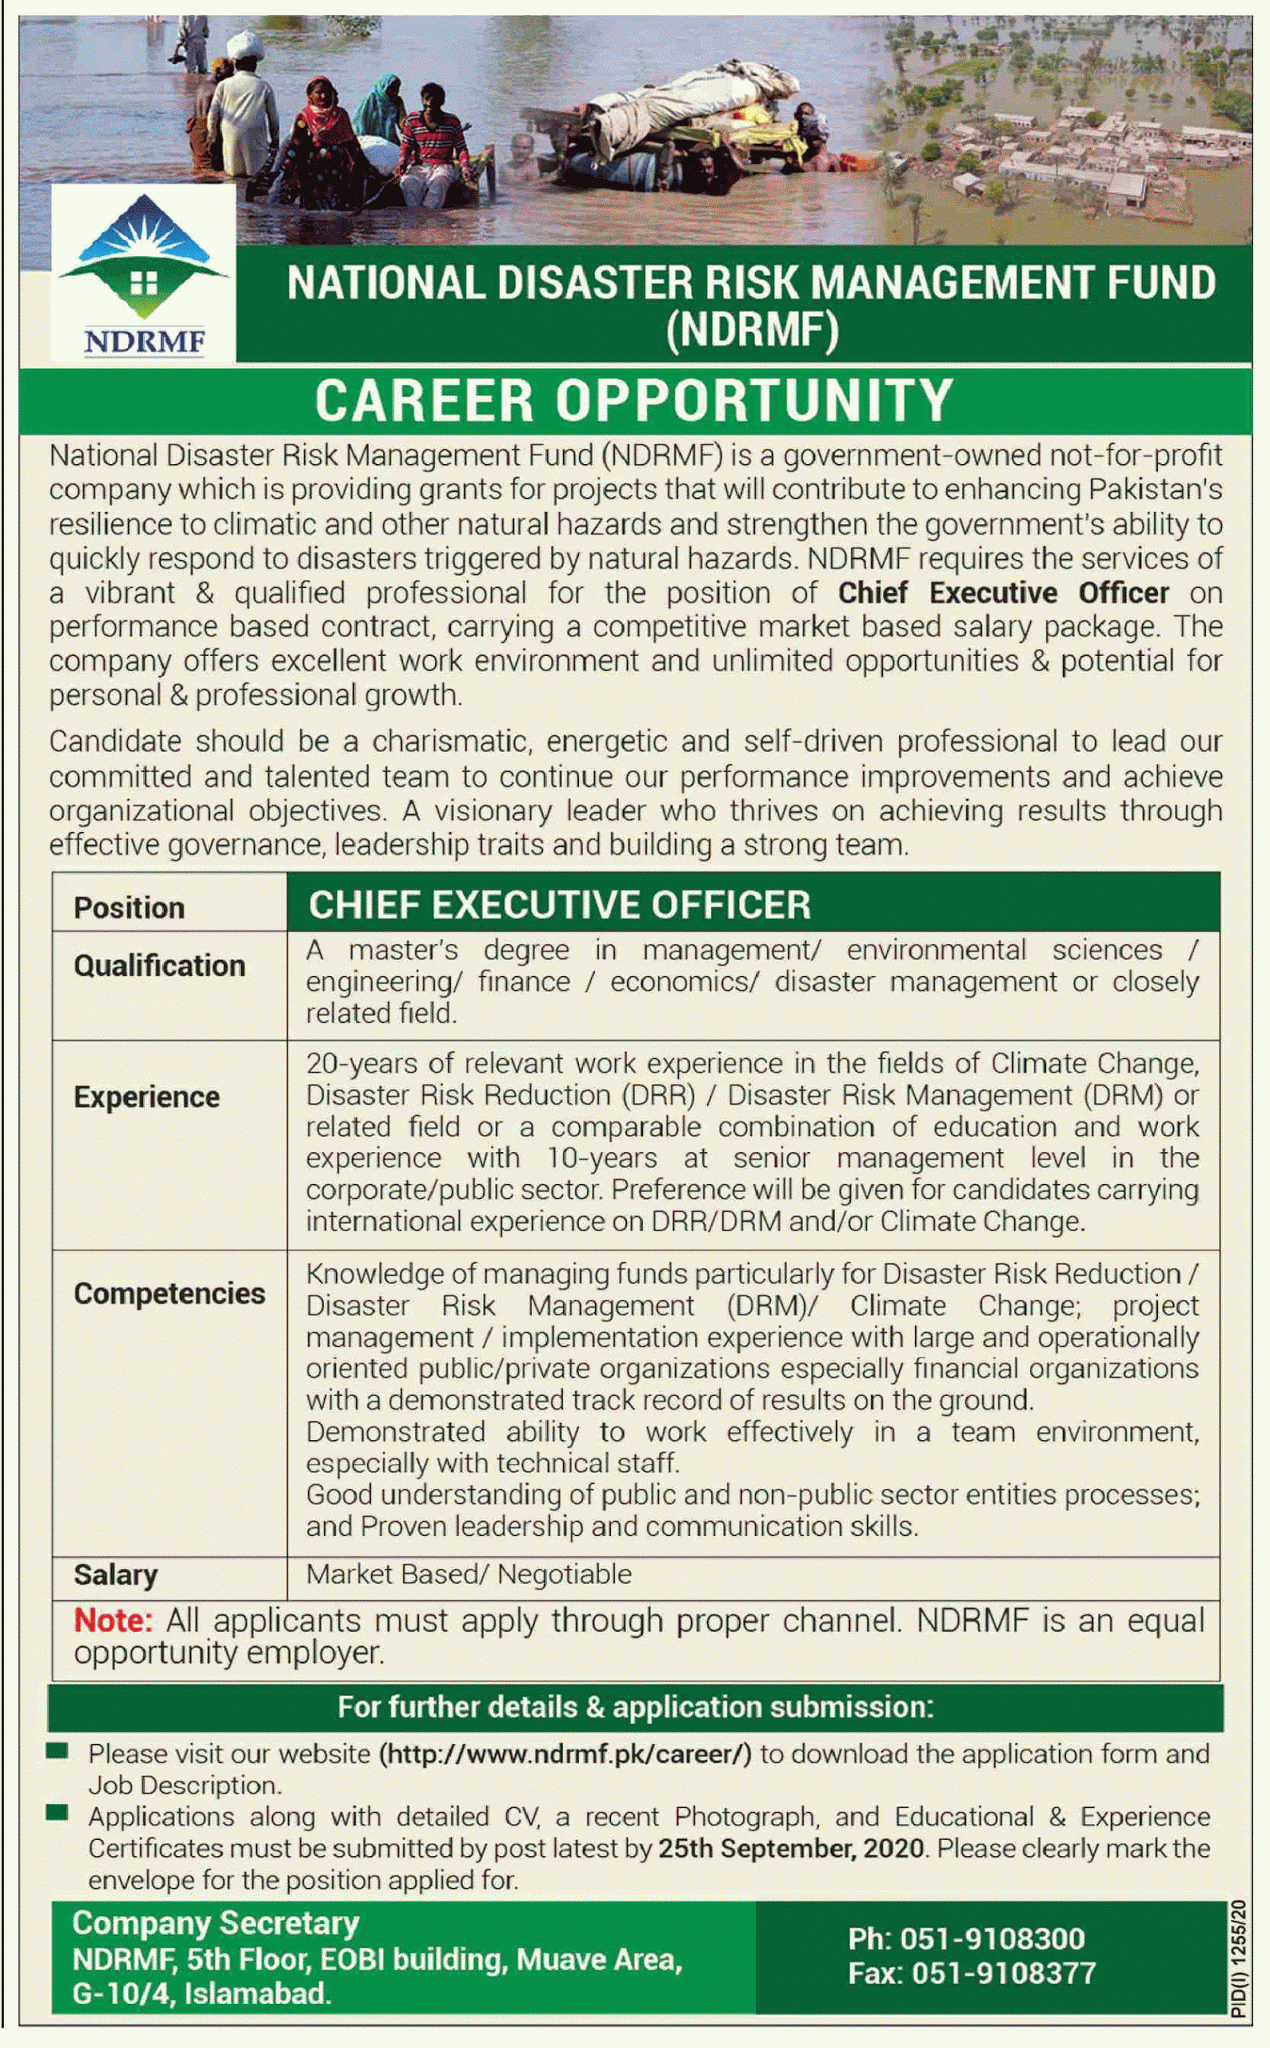 National Disaster Risk Management Fund (NDRMF) Jobs 2020| Jobs in Islambad